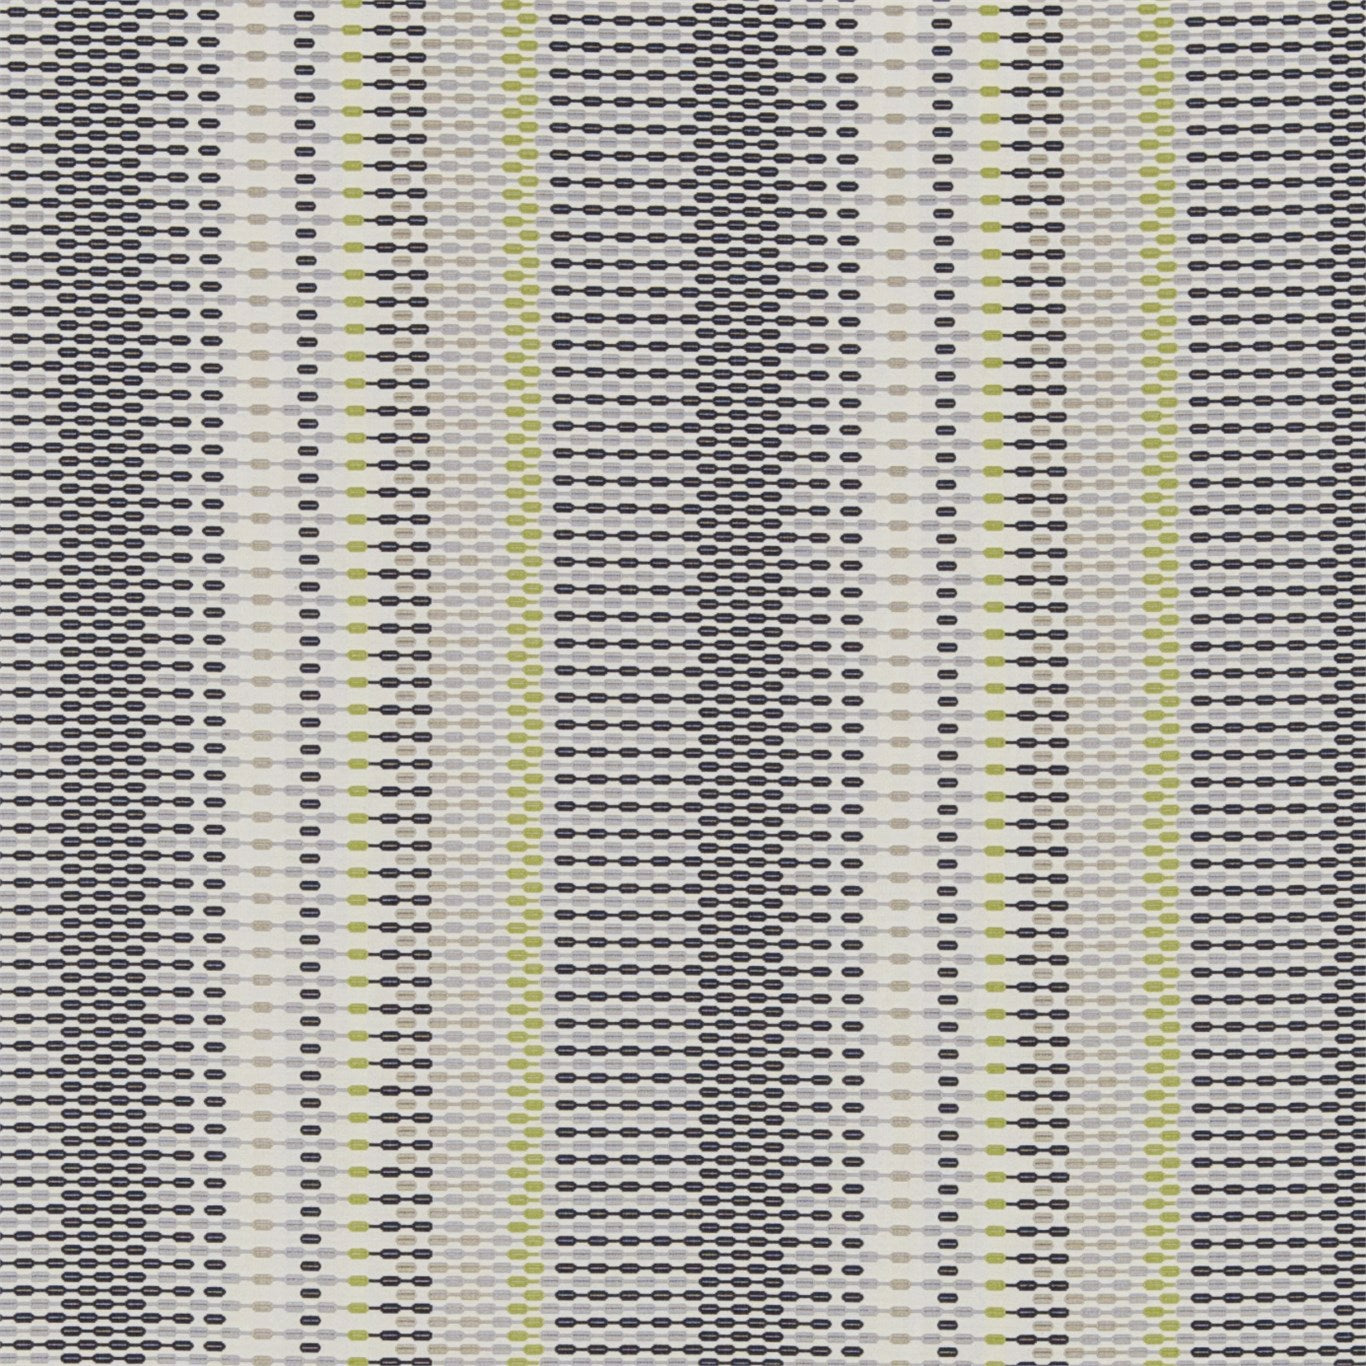 Array Fabric by Harlequin - HMOD130740 - Lime Onyx Charcoal